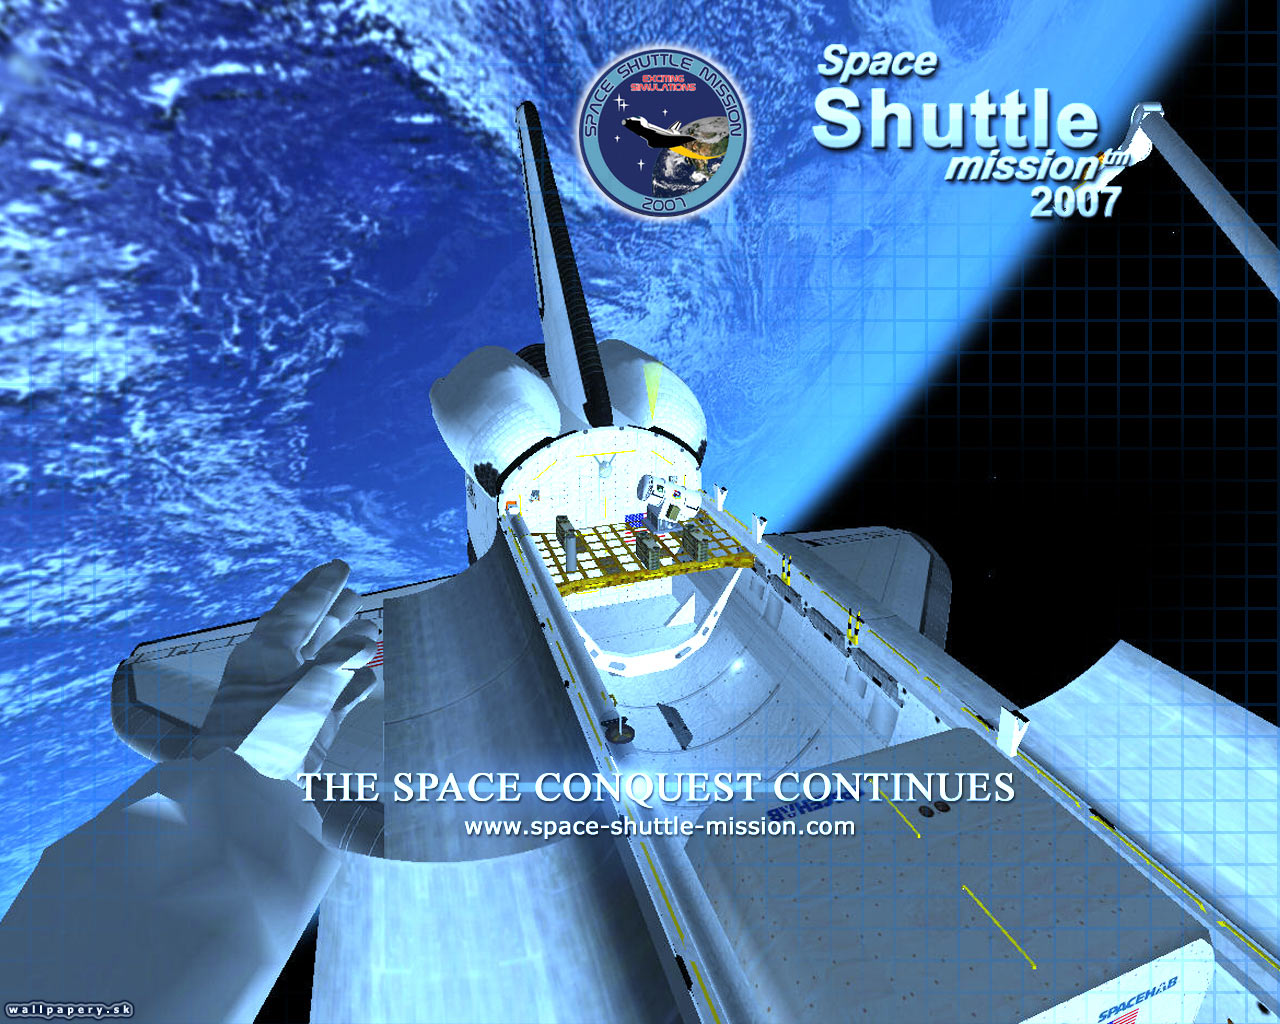 Space Shuttle Mission 2007 - wallpaper 3